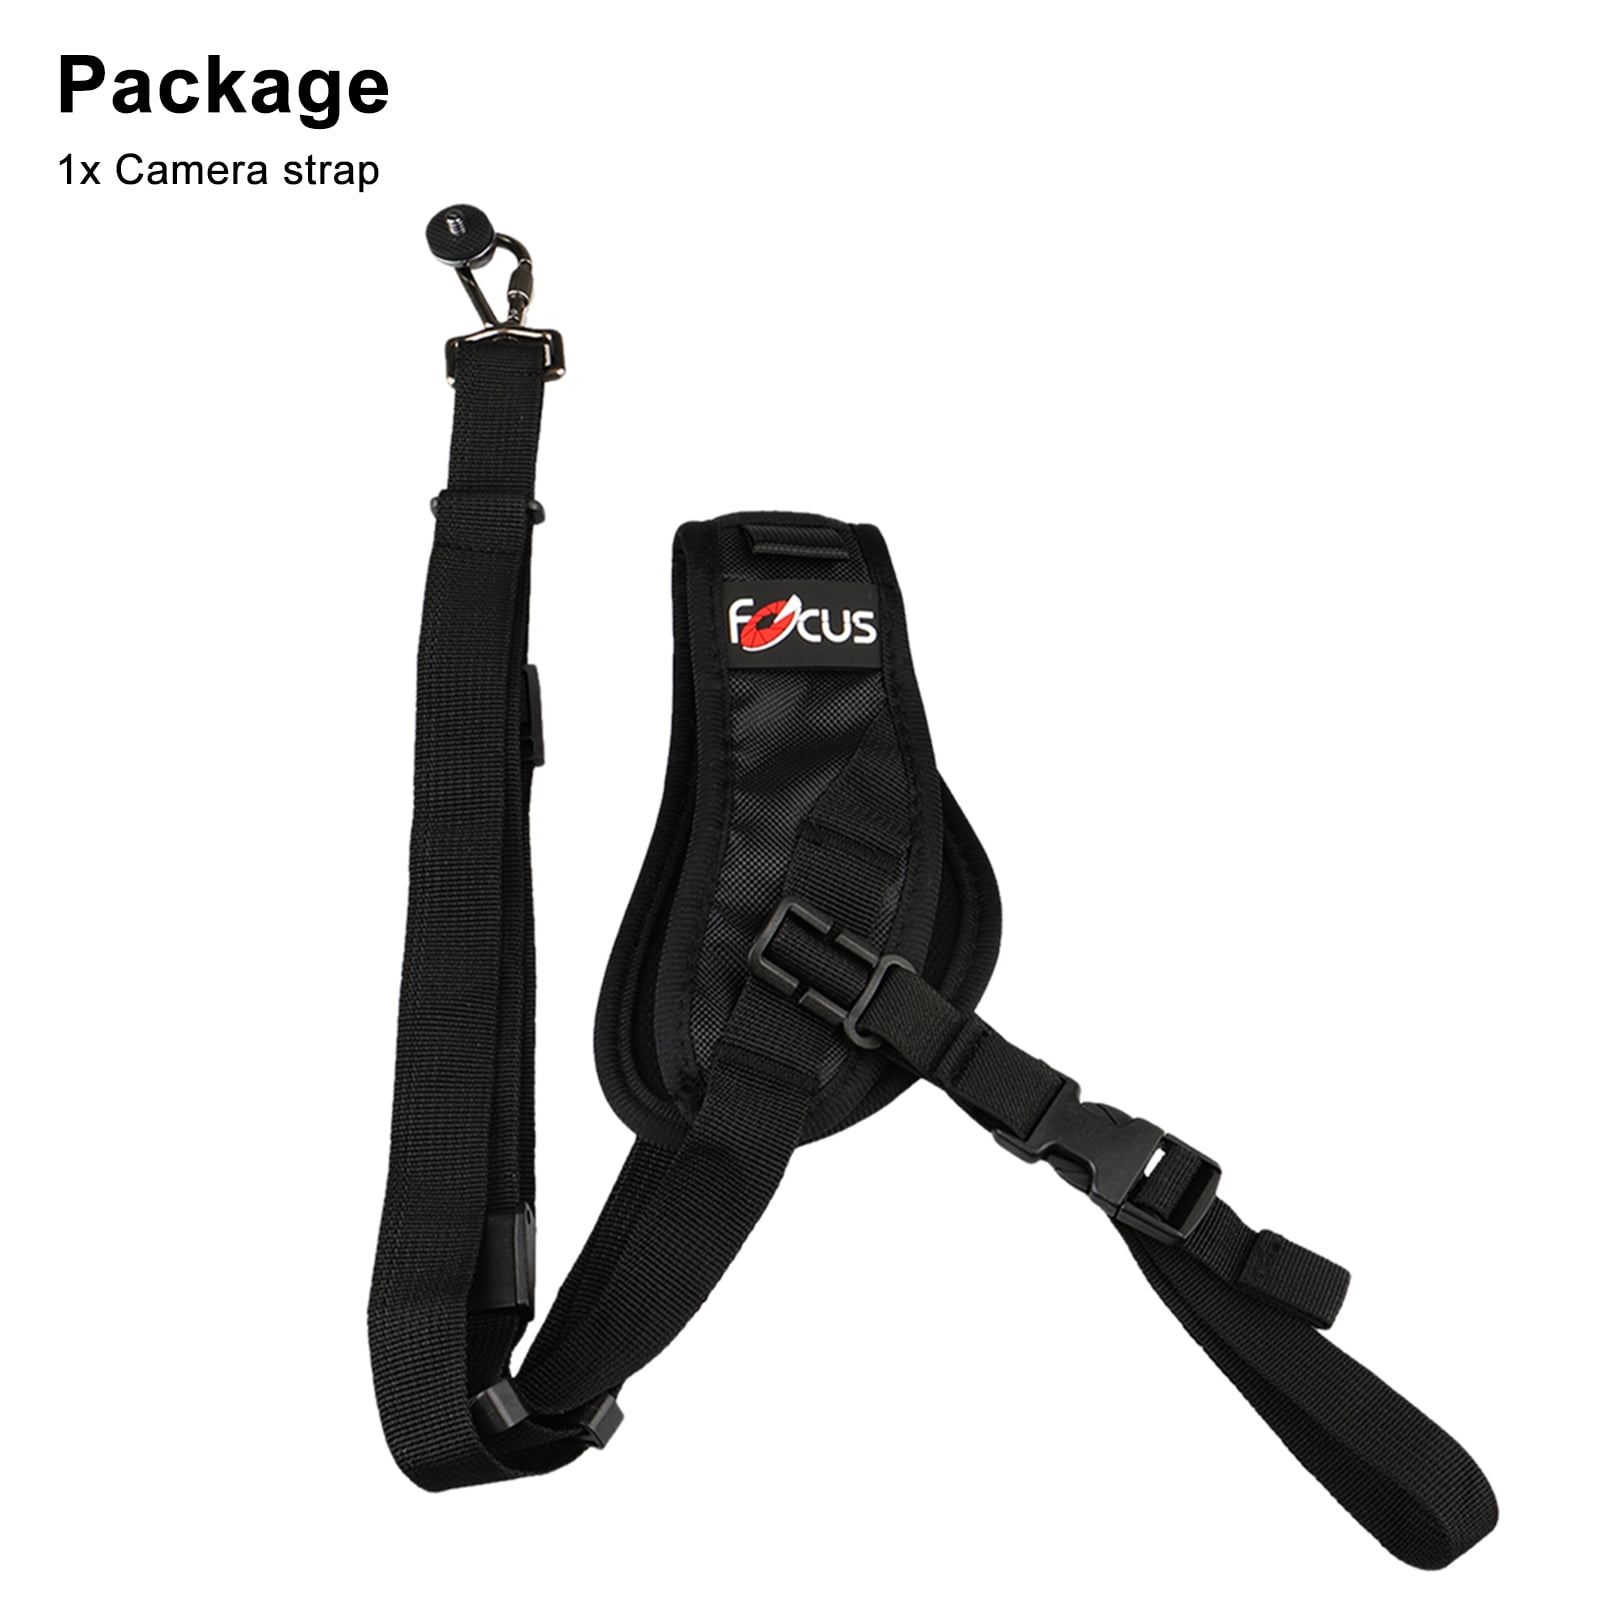 Hama Hama "Quick Shoot Strap" Carrying Strap for SLR Cameras 